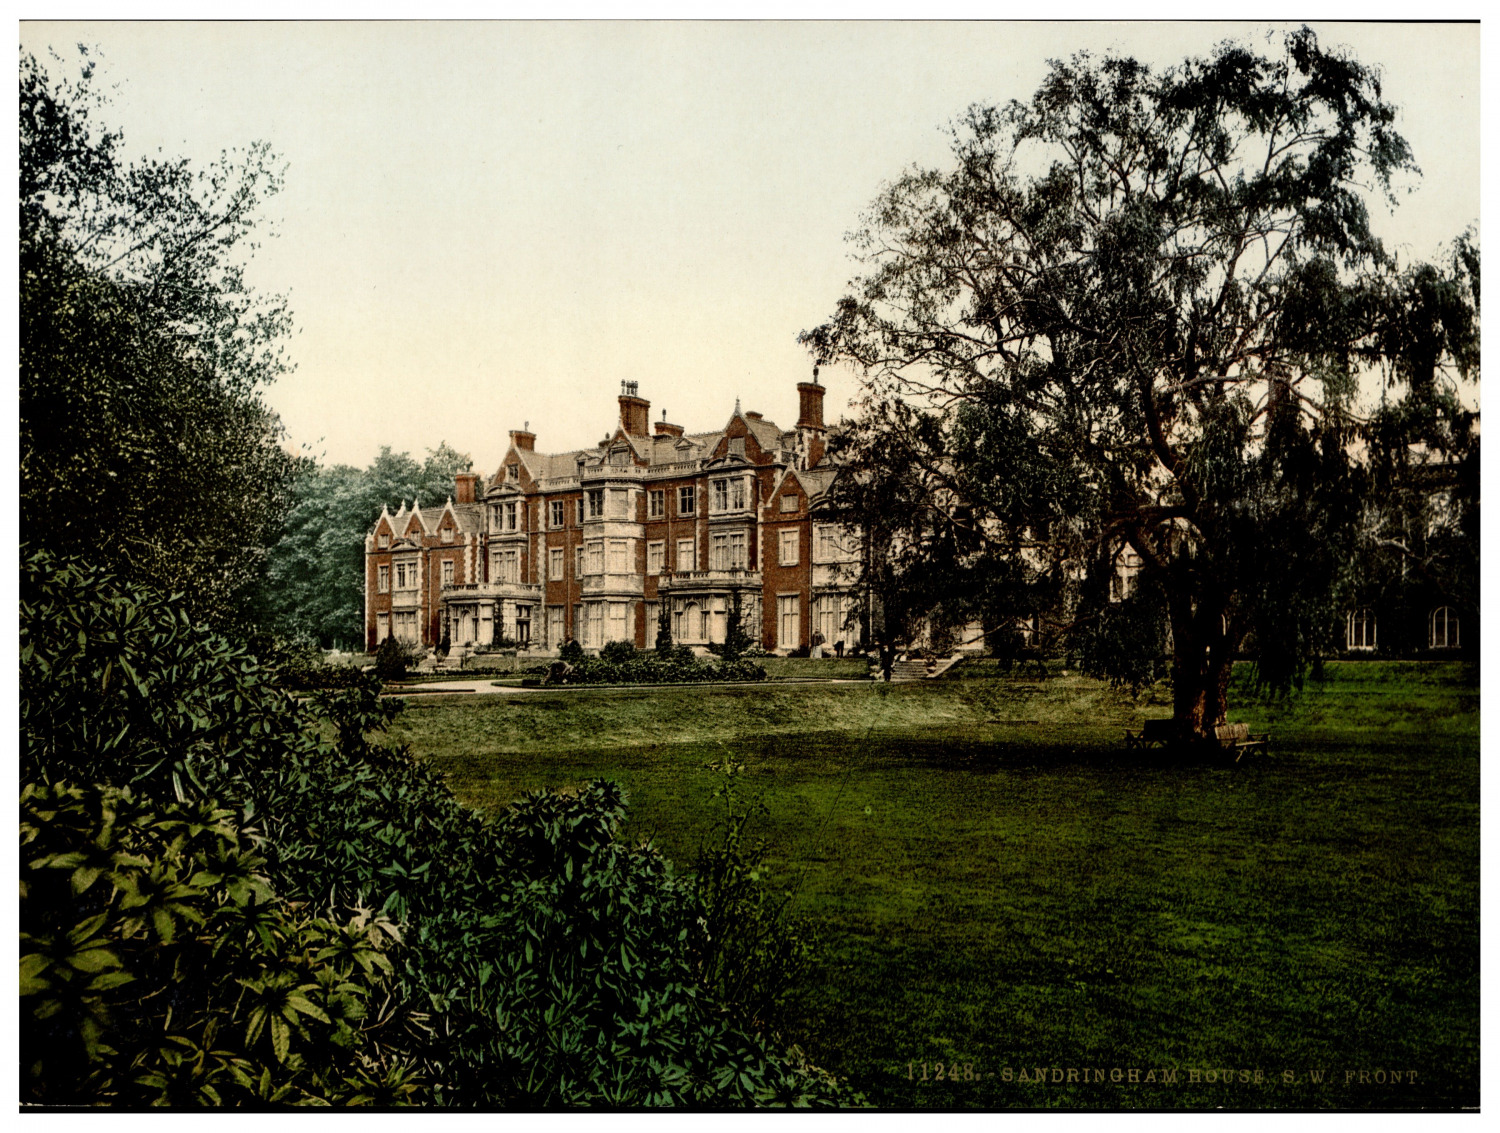 England. Norfolk. Sandringham, House. S.W. Front.  Vintage Photochrome by P.Z